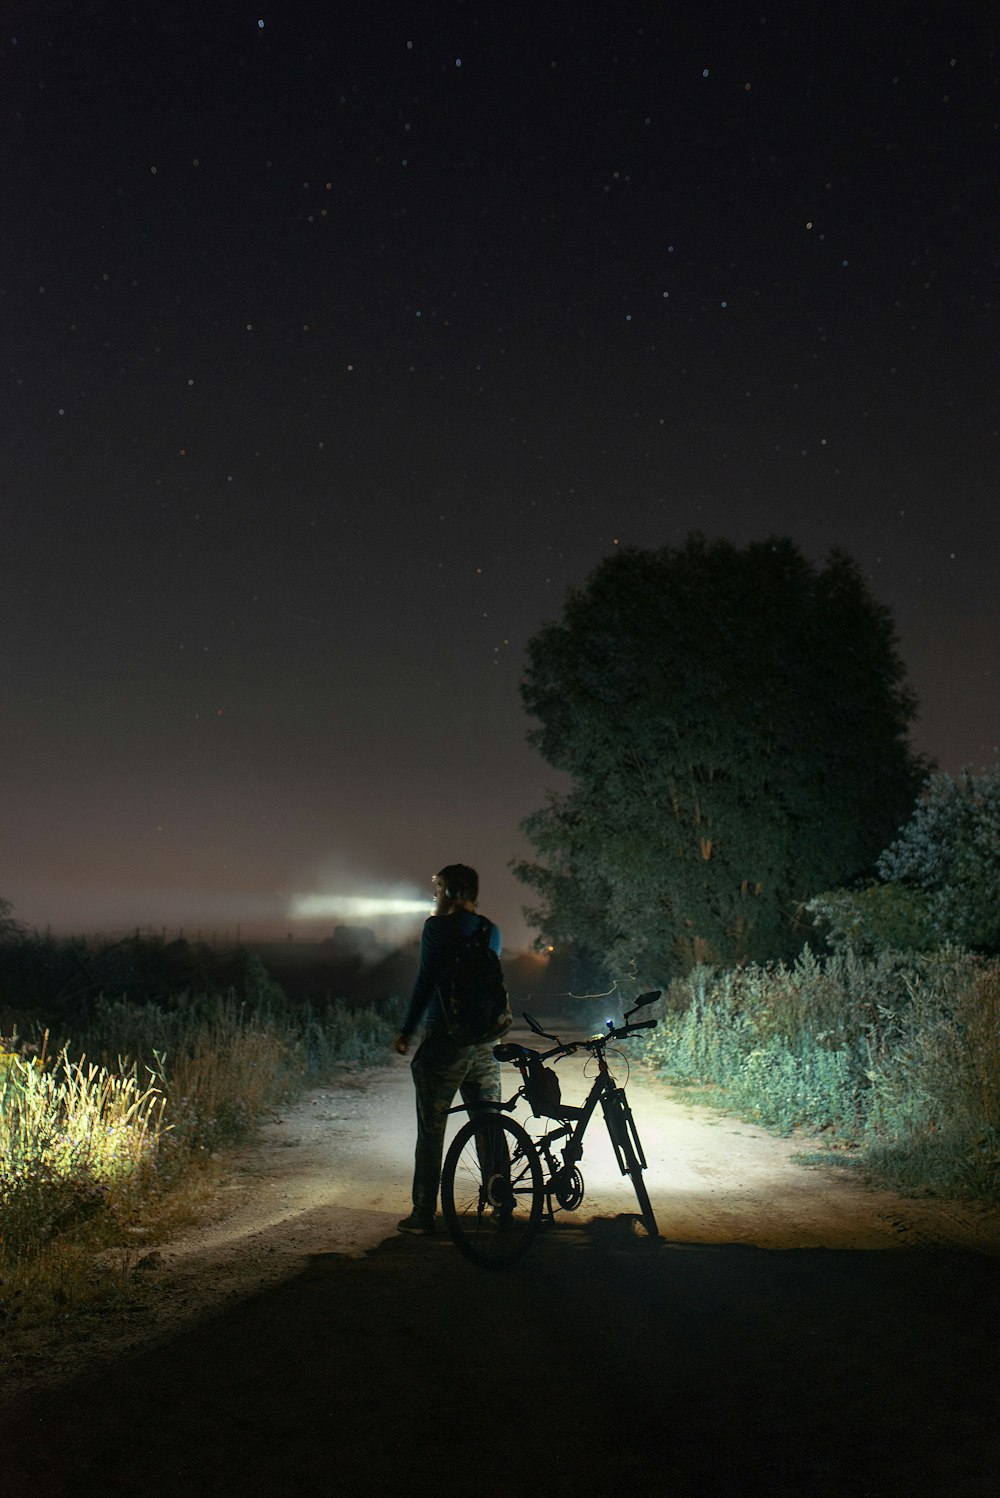 man in black jacket riding bicycle on dirt road during night time